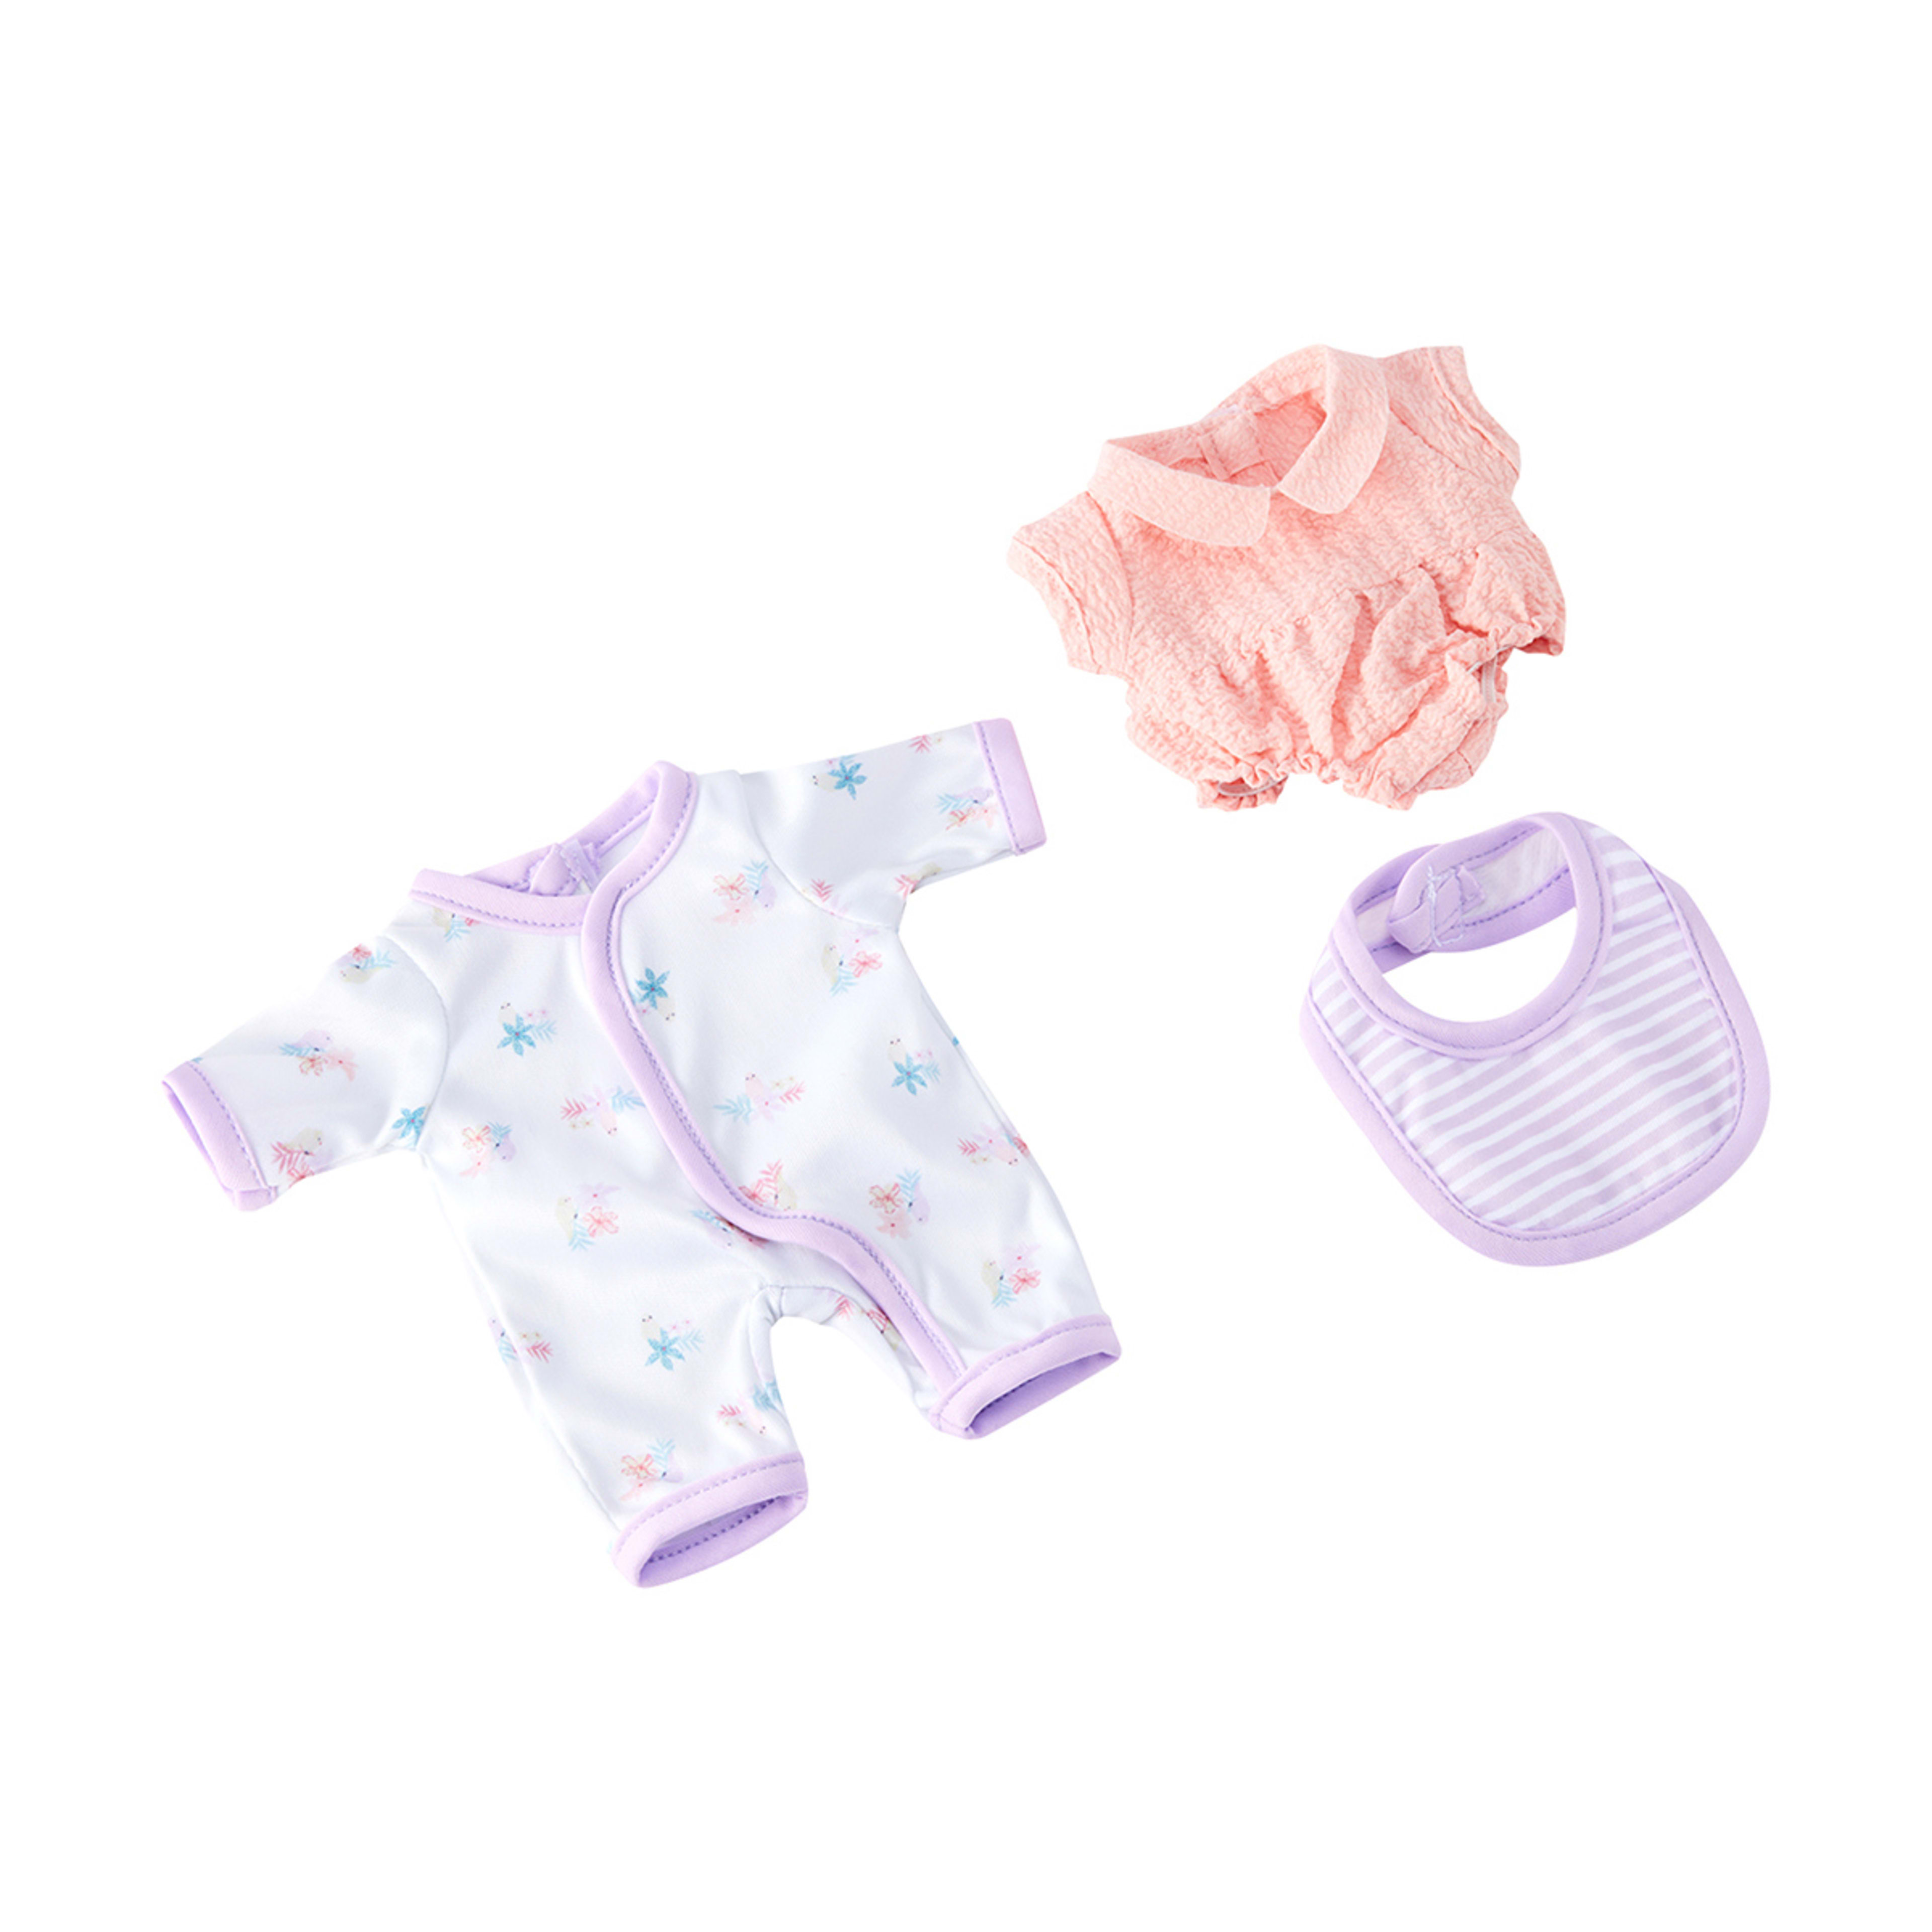 2 Pack Kindred Folks Little Baby Outfits - Assorted - Kmart